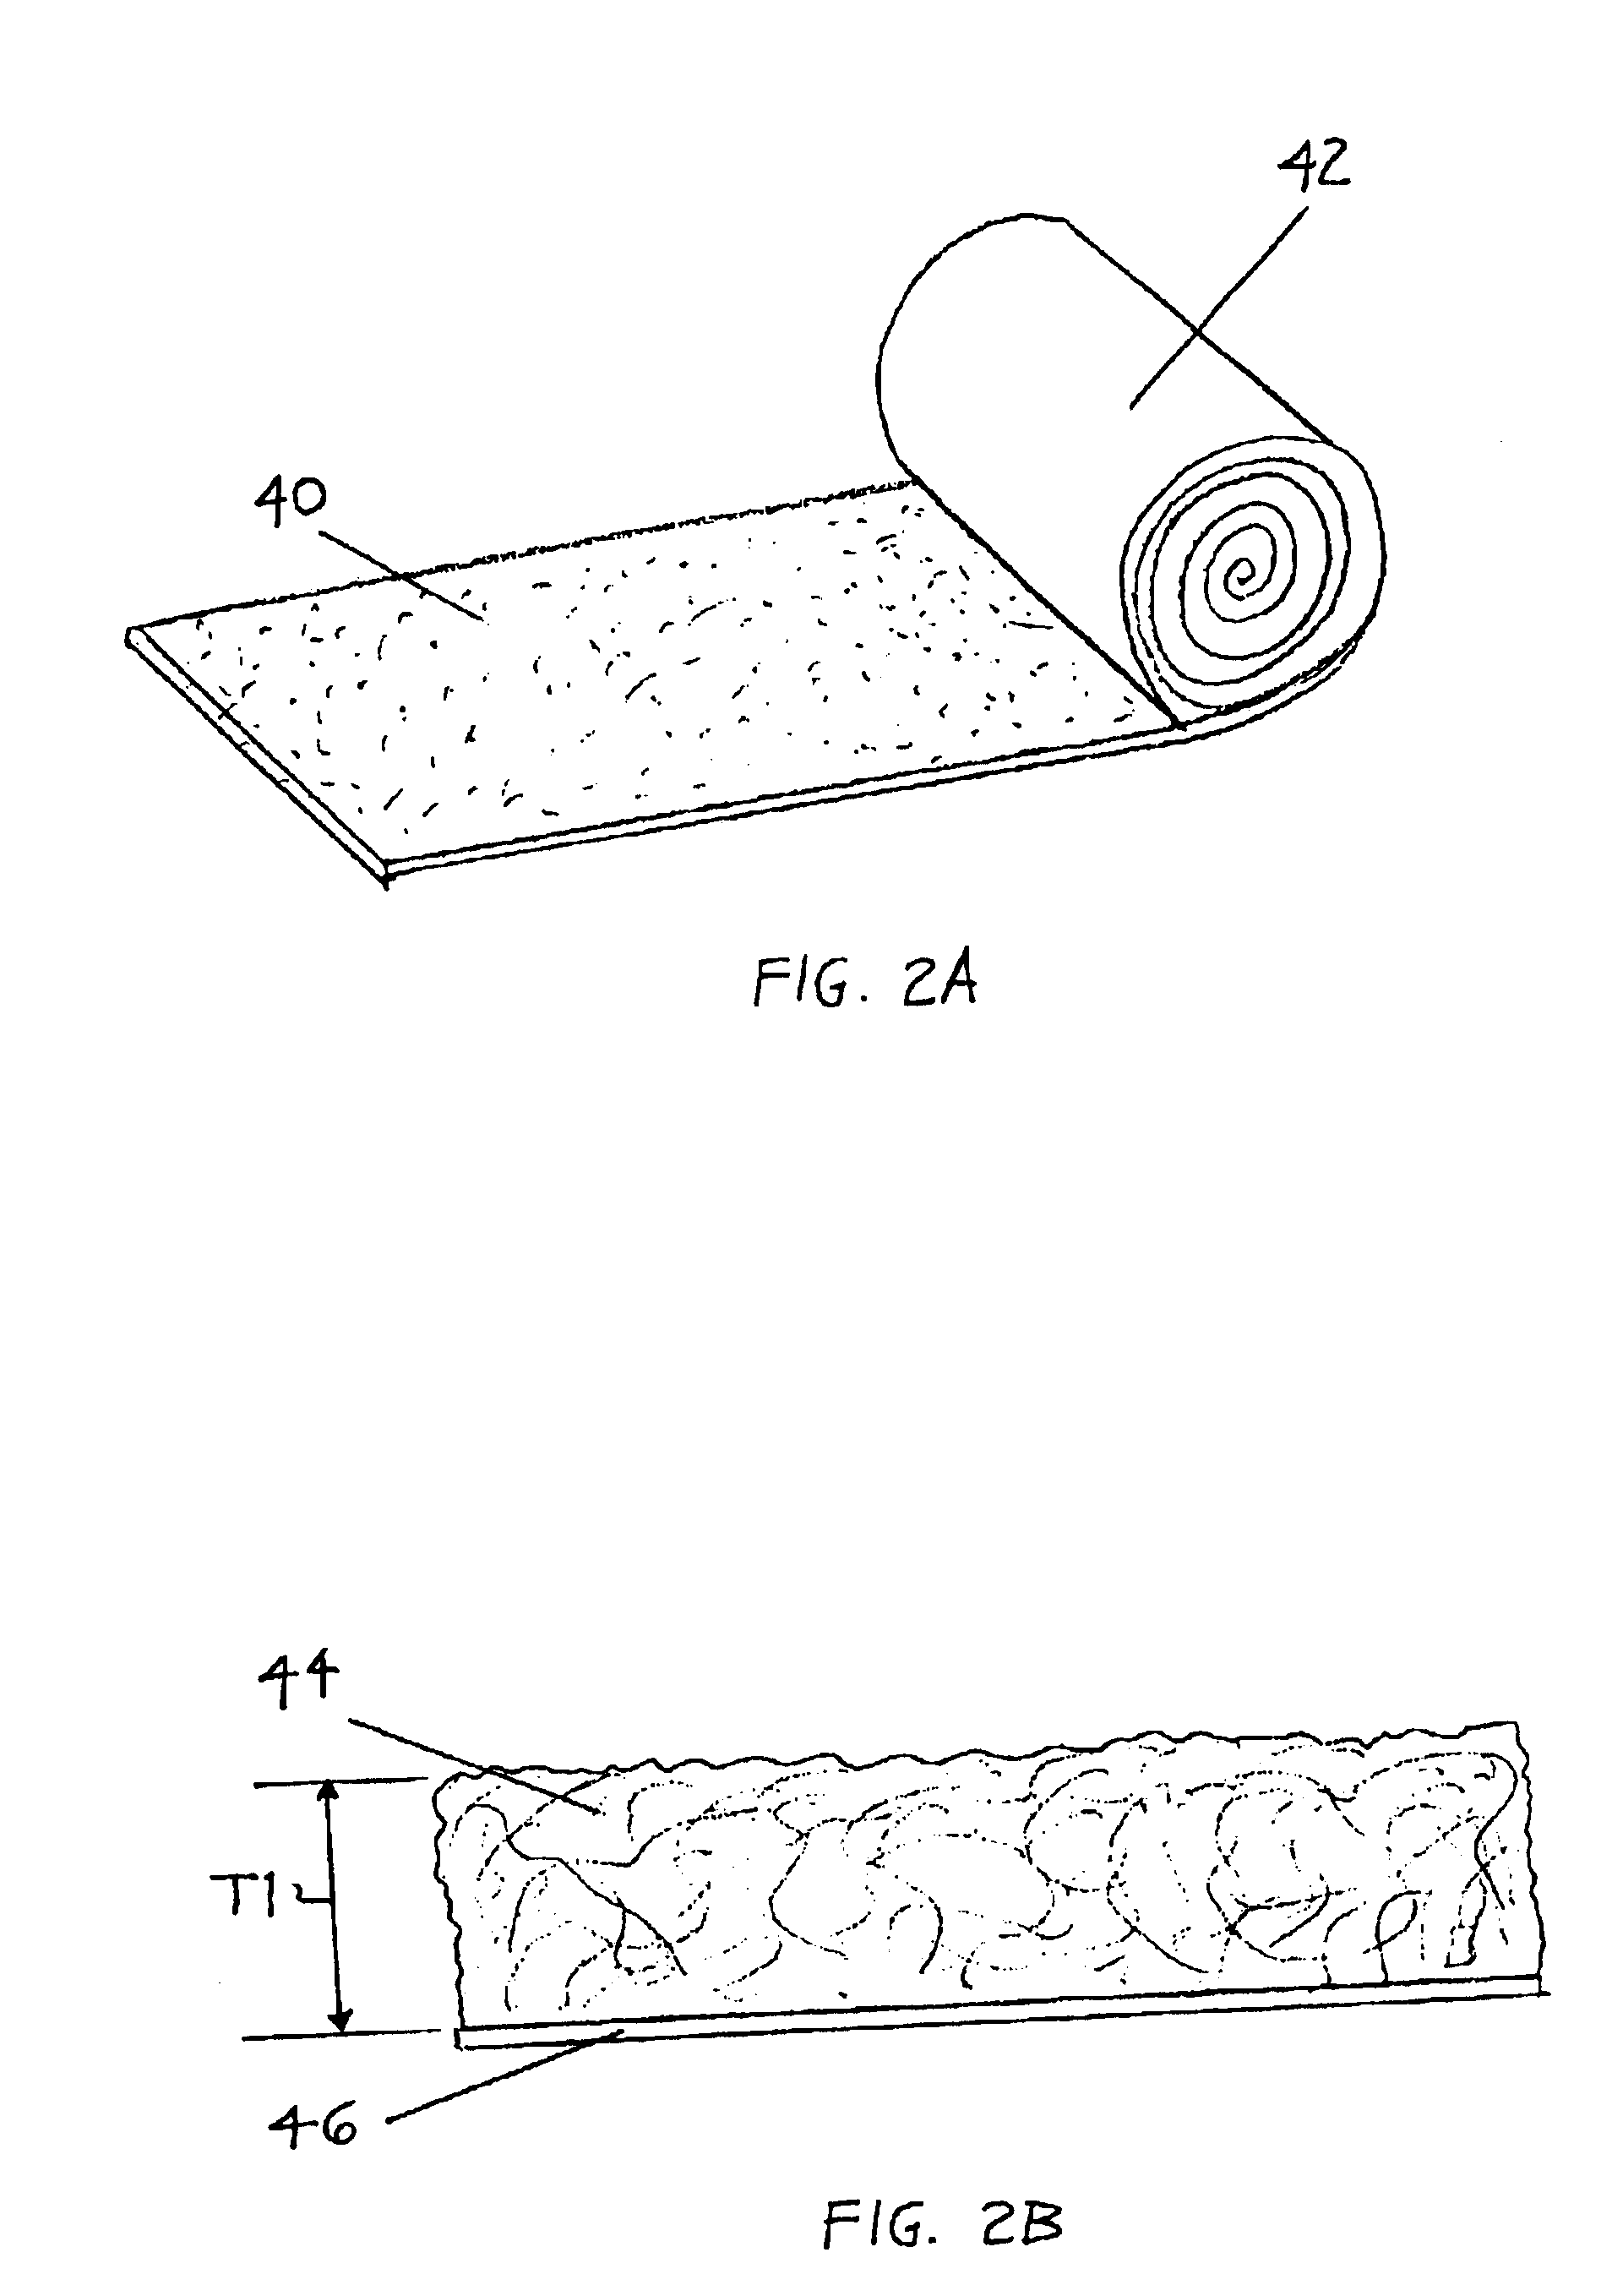 Method and material for preventing erosion and maintaining playability of golf course sand bunkers